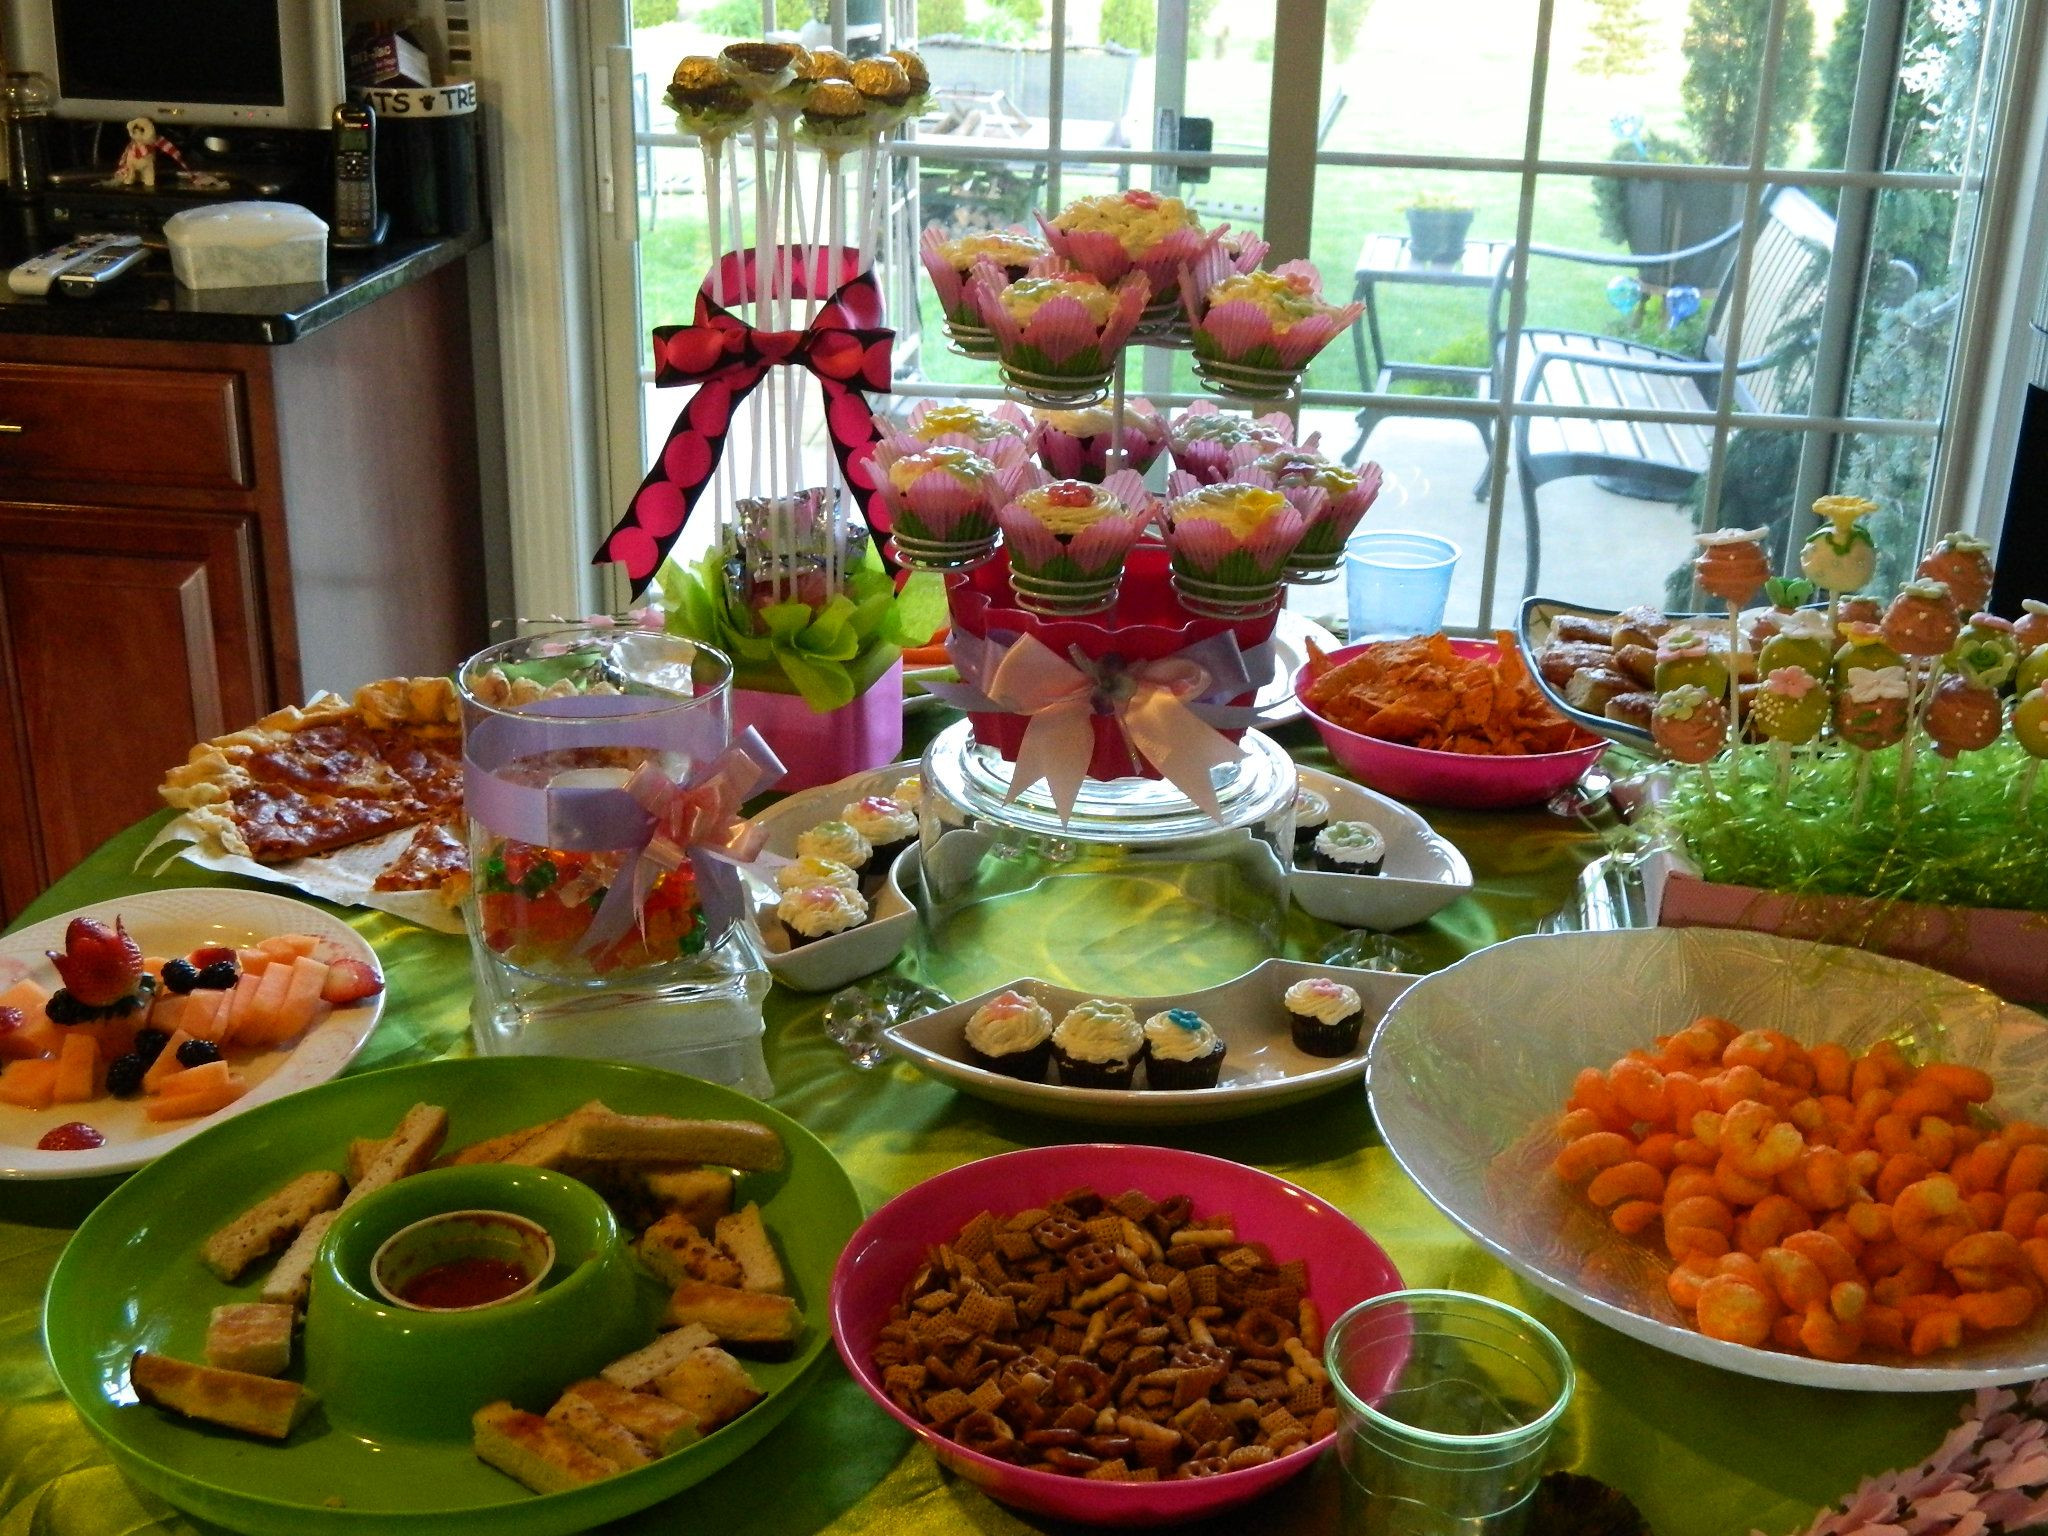 24 Of the Best Ideas for 16th Birthday Party Food Ideas - Home, Family